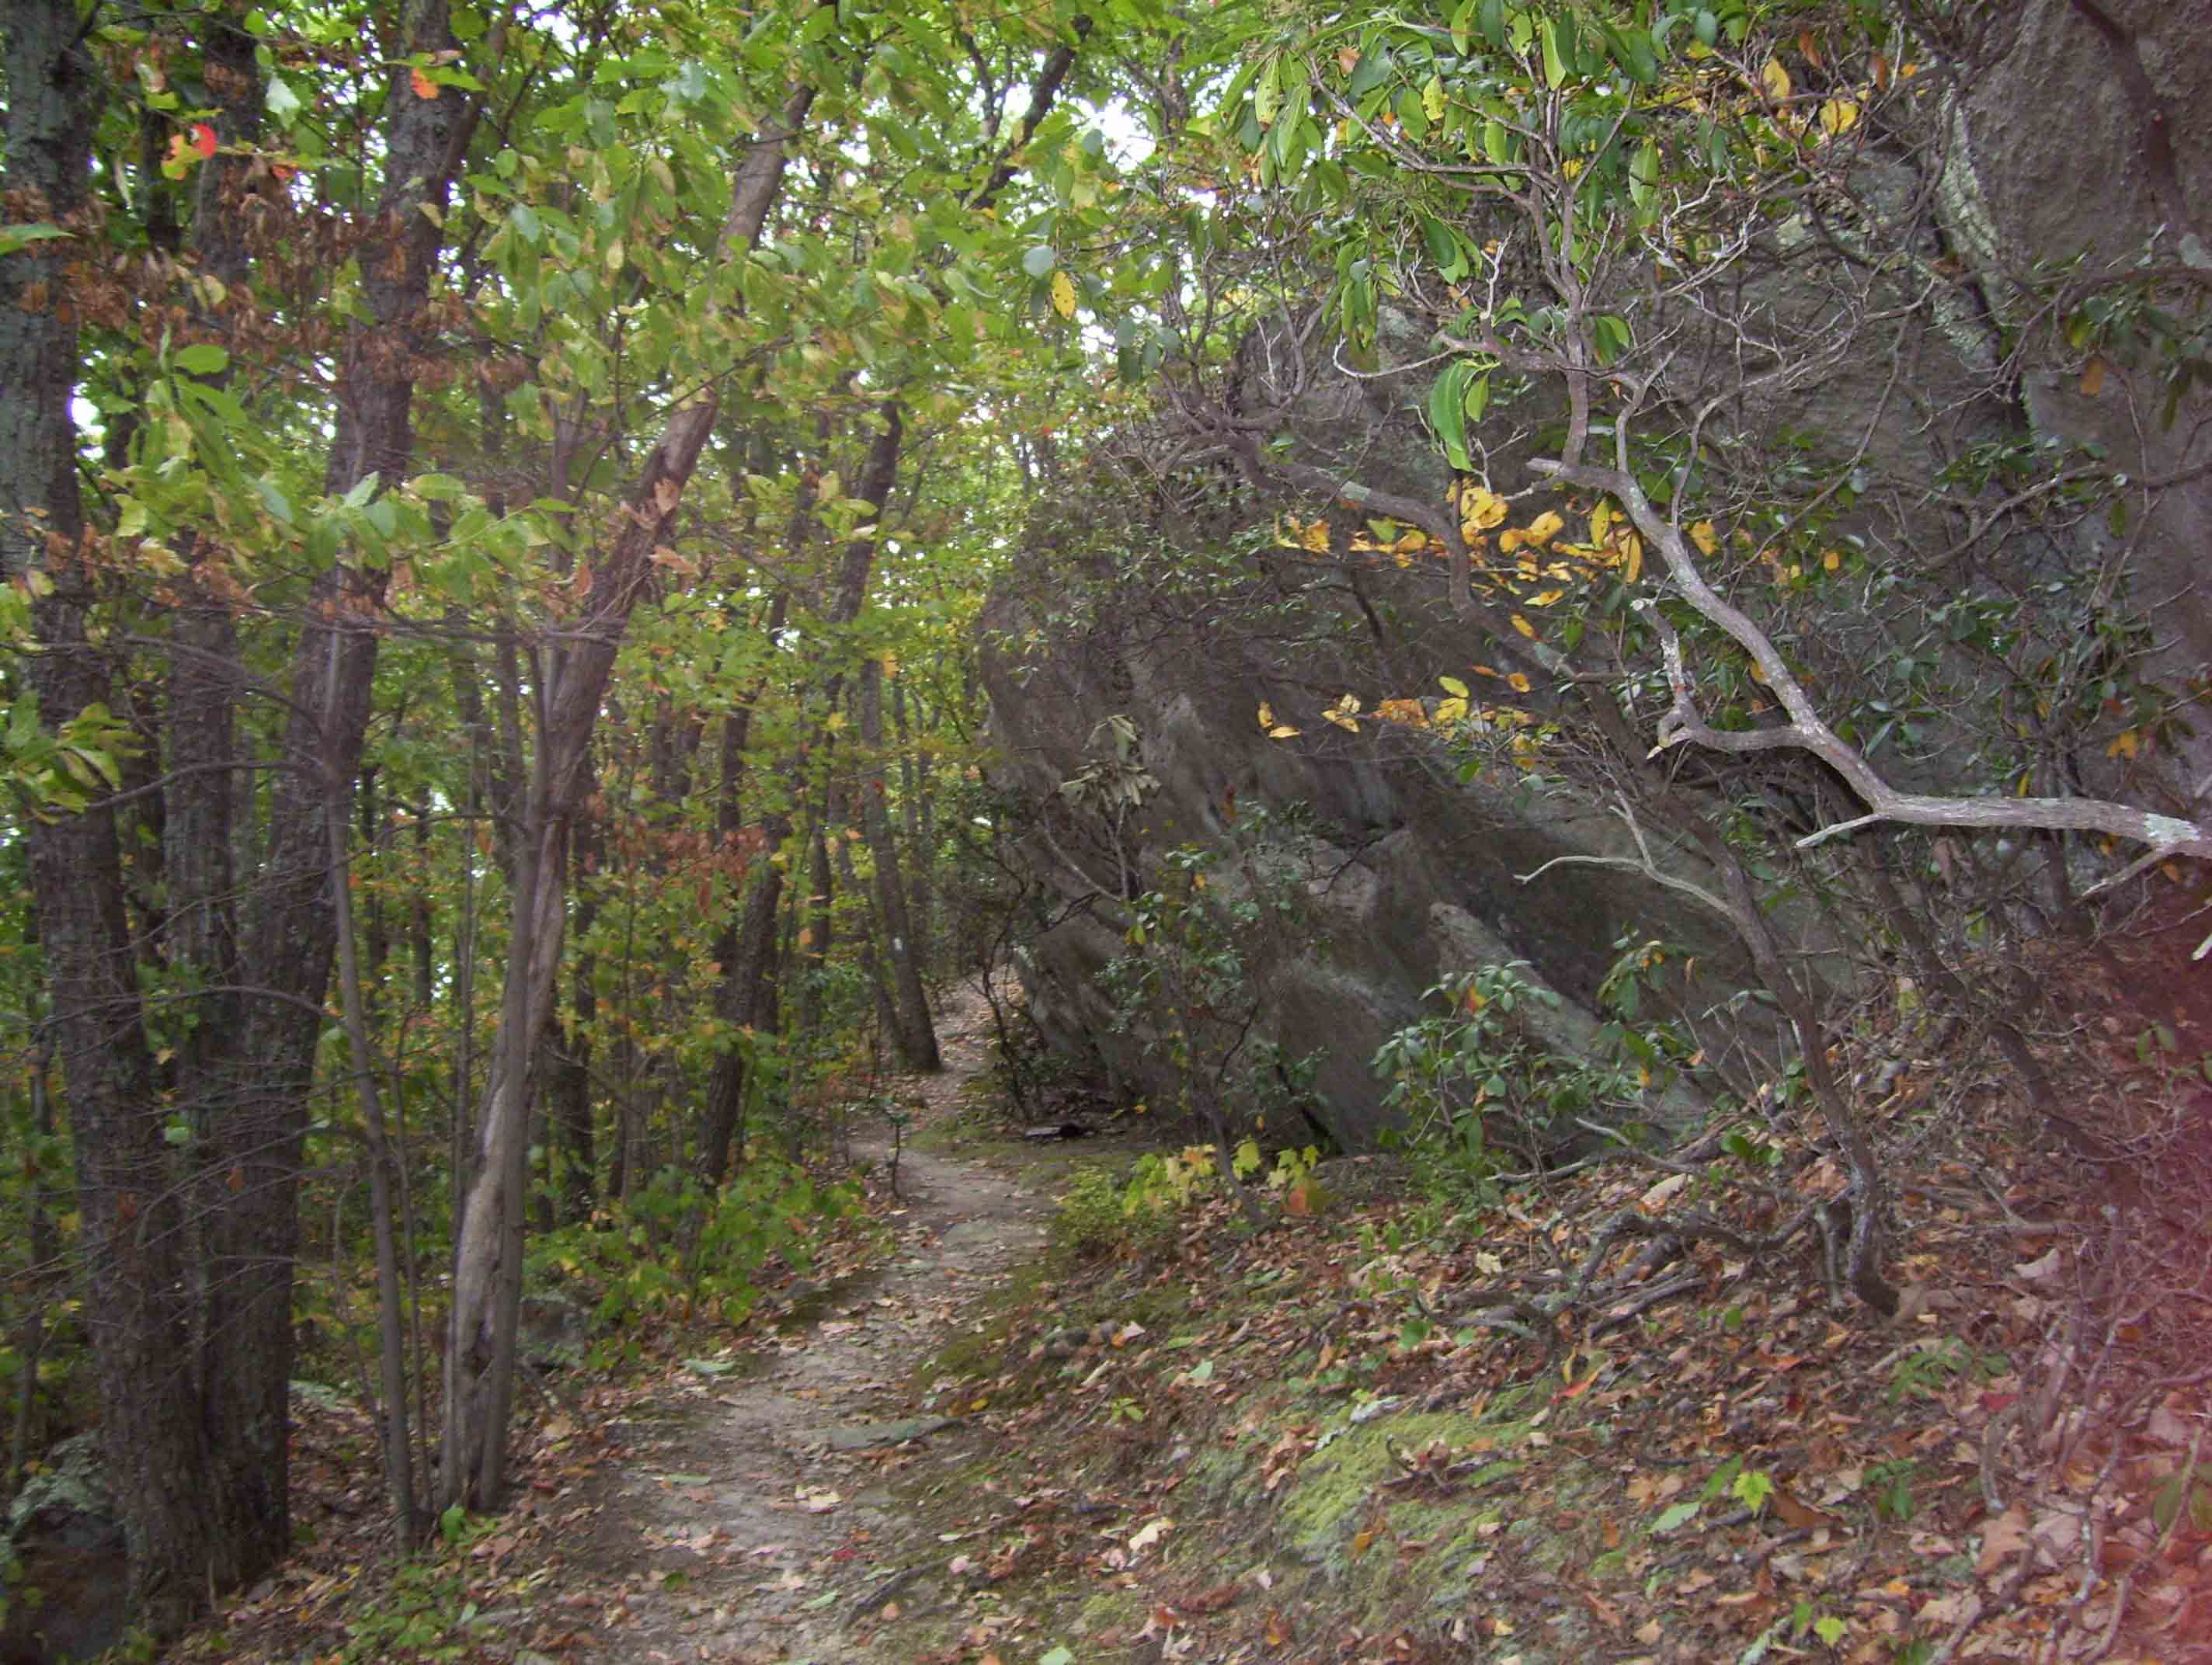 Rock outcroppings along trail. This is just south of the viewpoint at Mile 19.9.  Courtesy dlcul@conncoll.edu